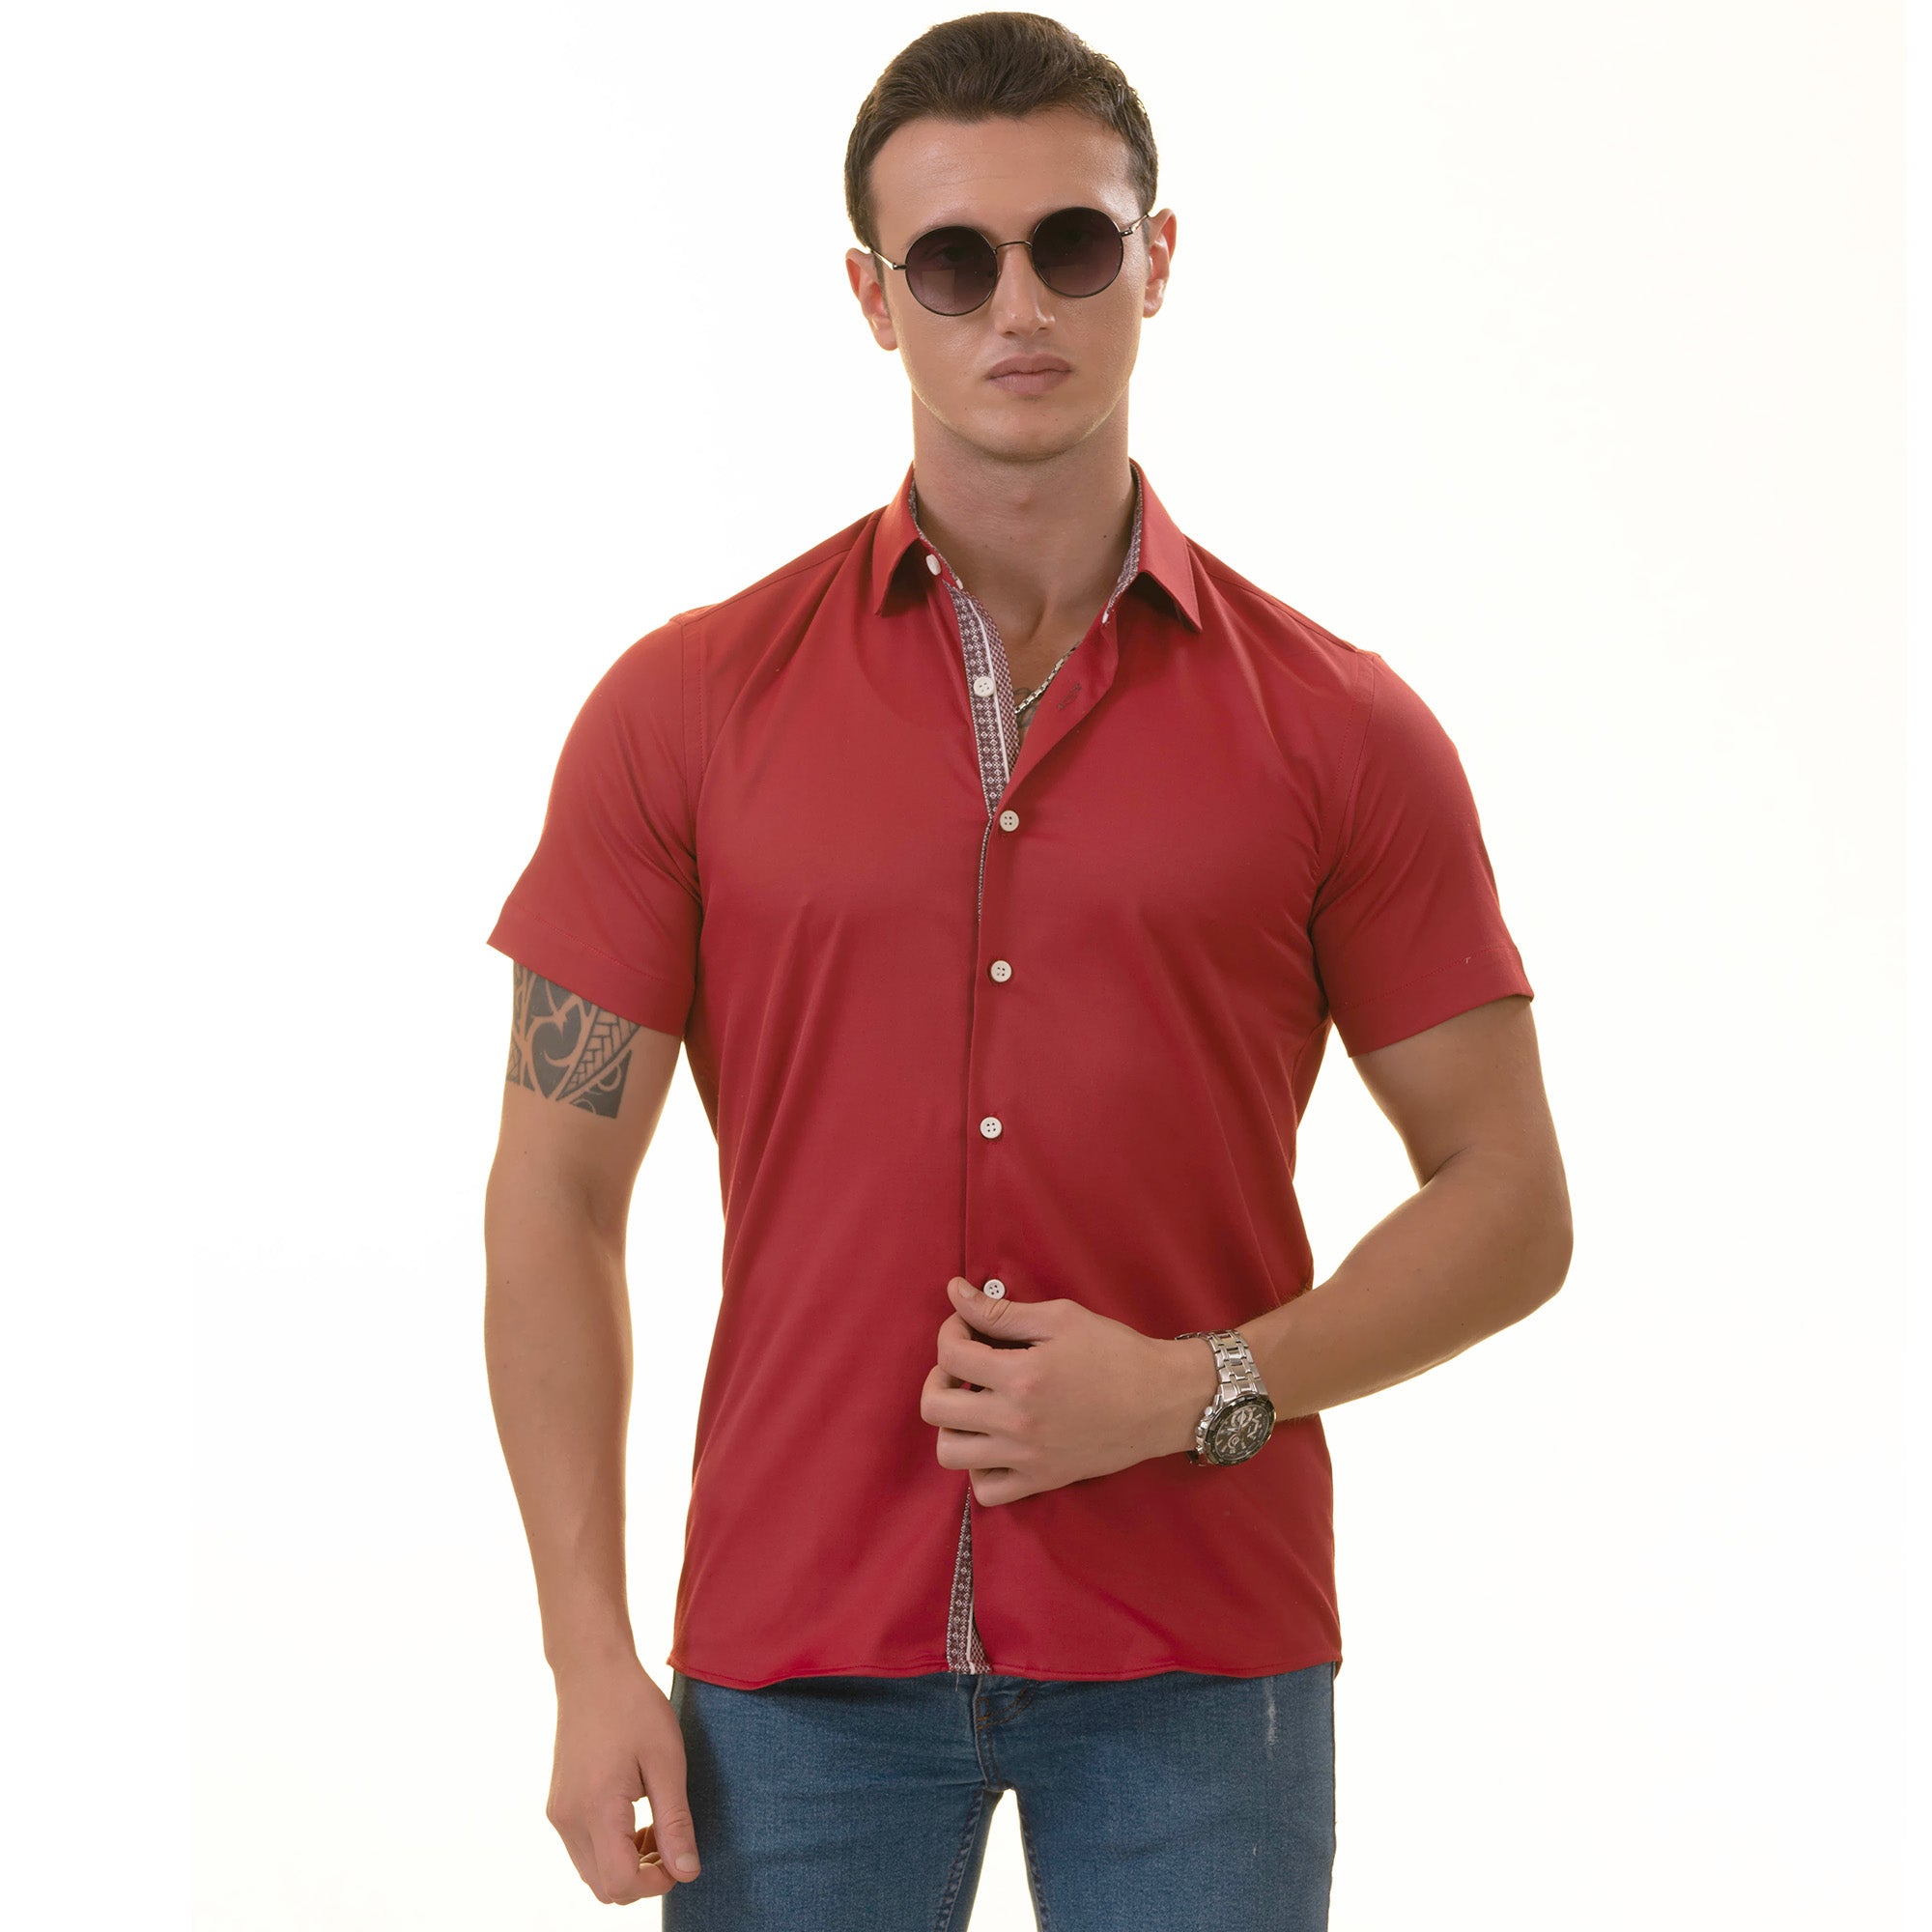 Red with Burgandy interior Paisley  Short Sleeve Button up Shirts - Tailored Slim Fit Cotton Dress Shirts